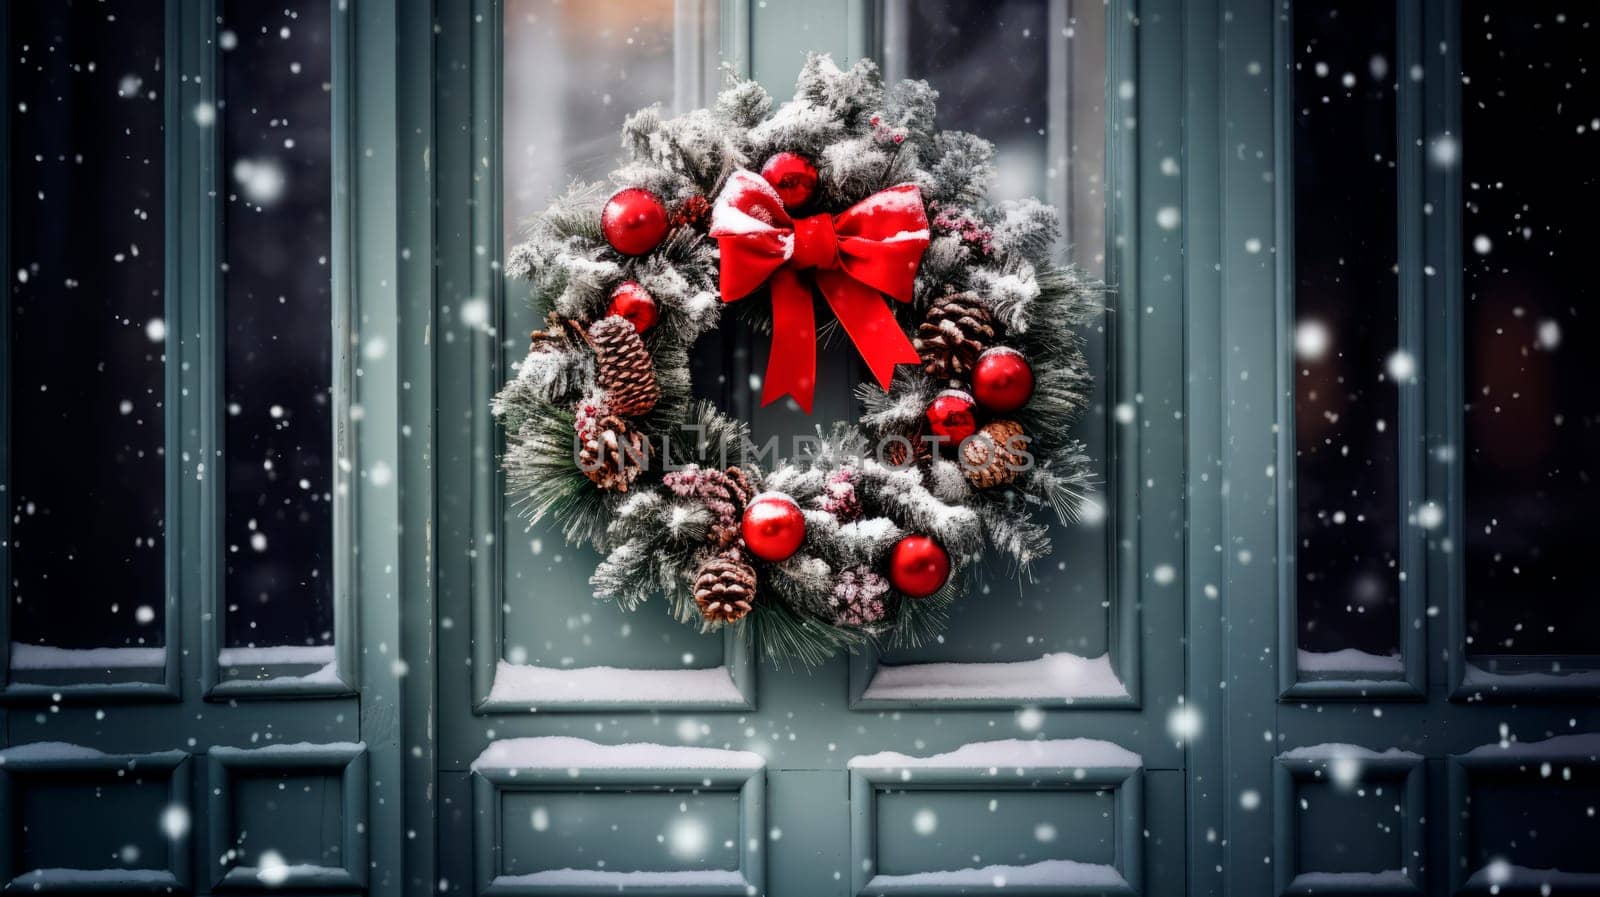 The door of the house is decorated with a Christmas wreath by Spirina